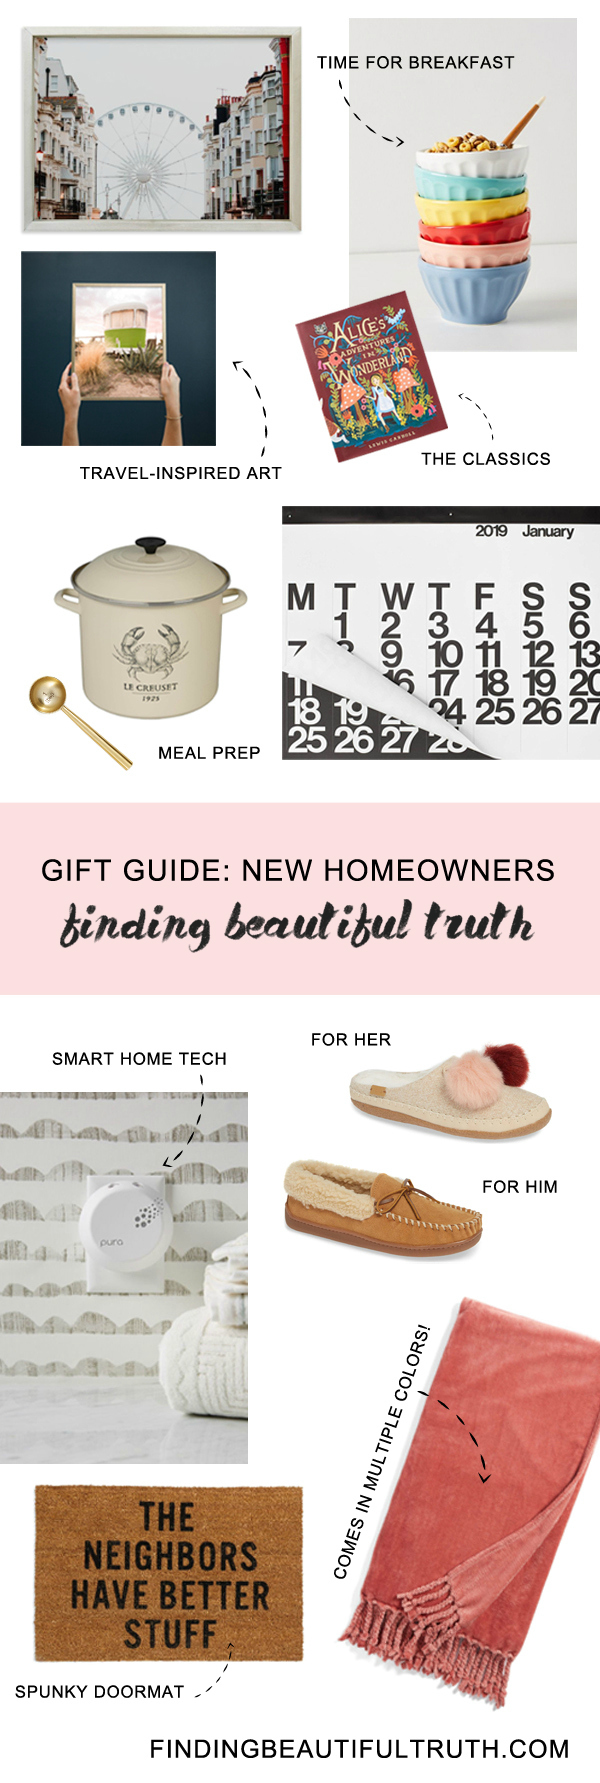 gift ideas for the new homeowners | holiday gift guide via Finding Beautiful Truth